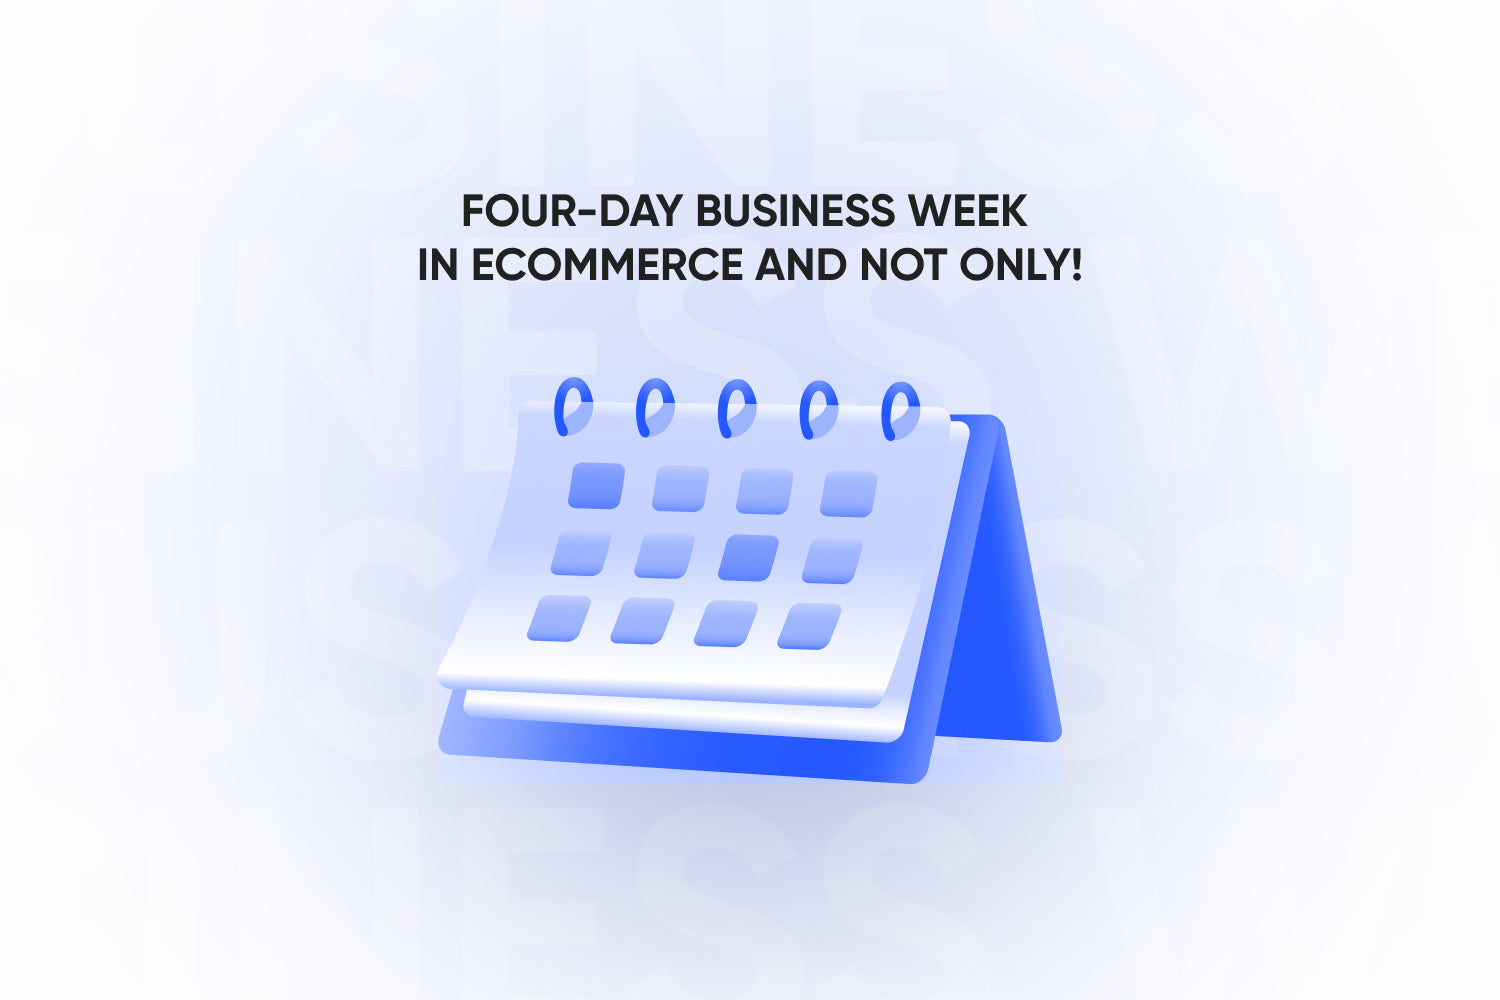 Four-day business week in eCommerce 